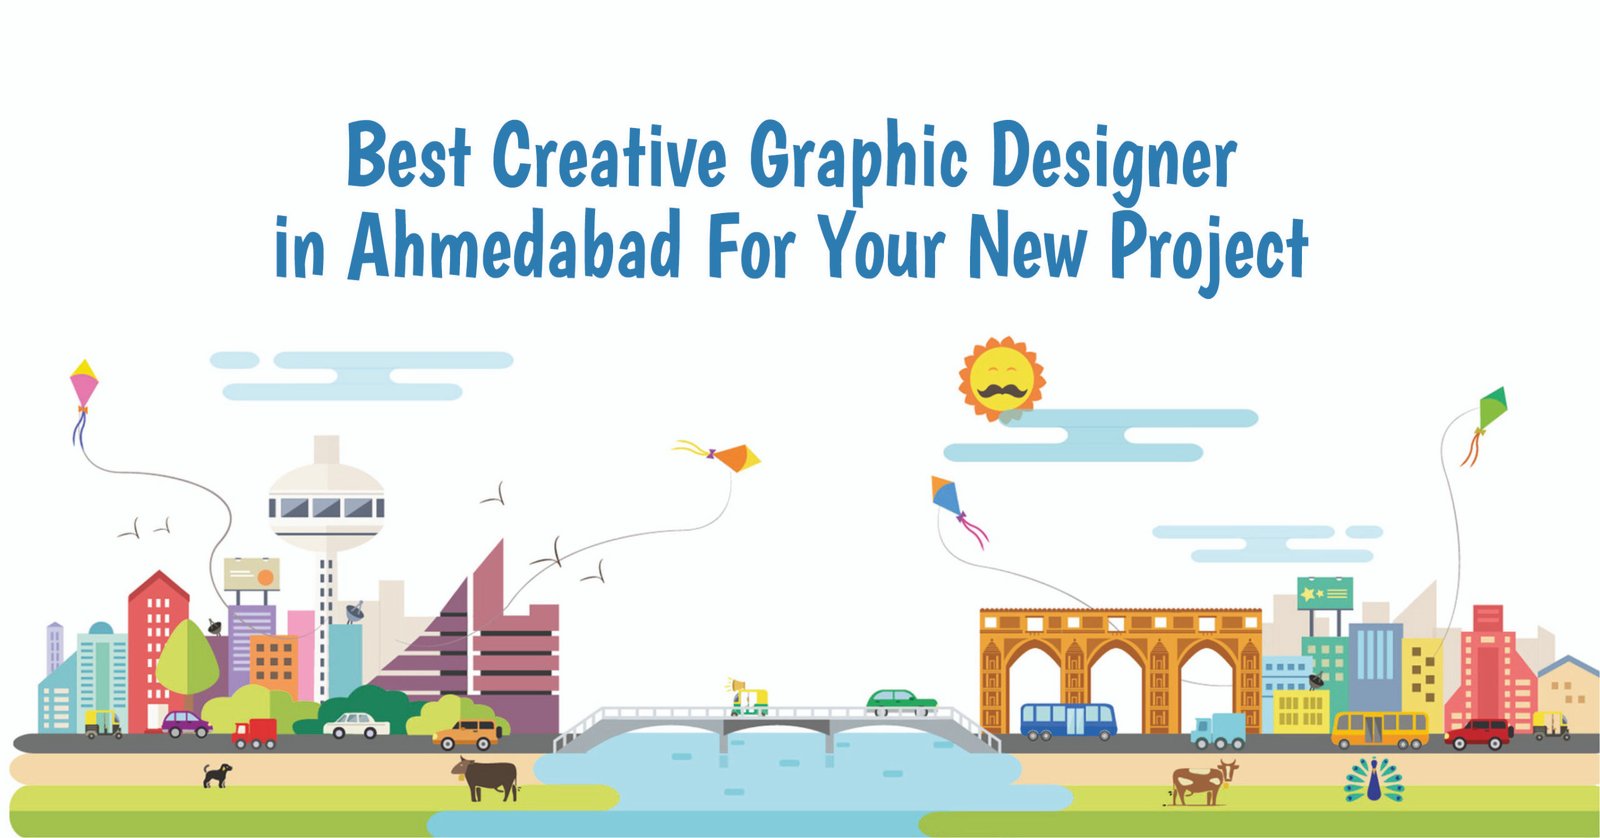 Best Creative Graphic Designer in Ahmedabad For Your New Project